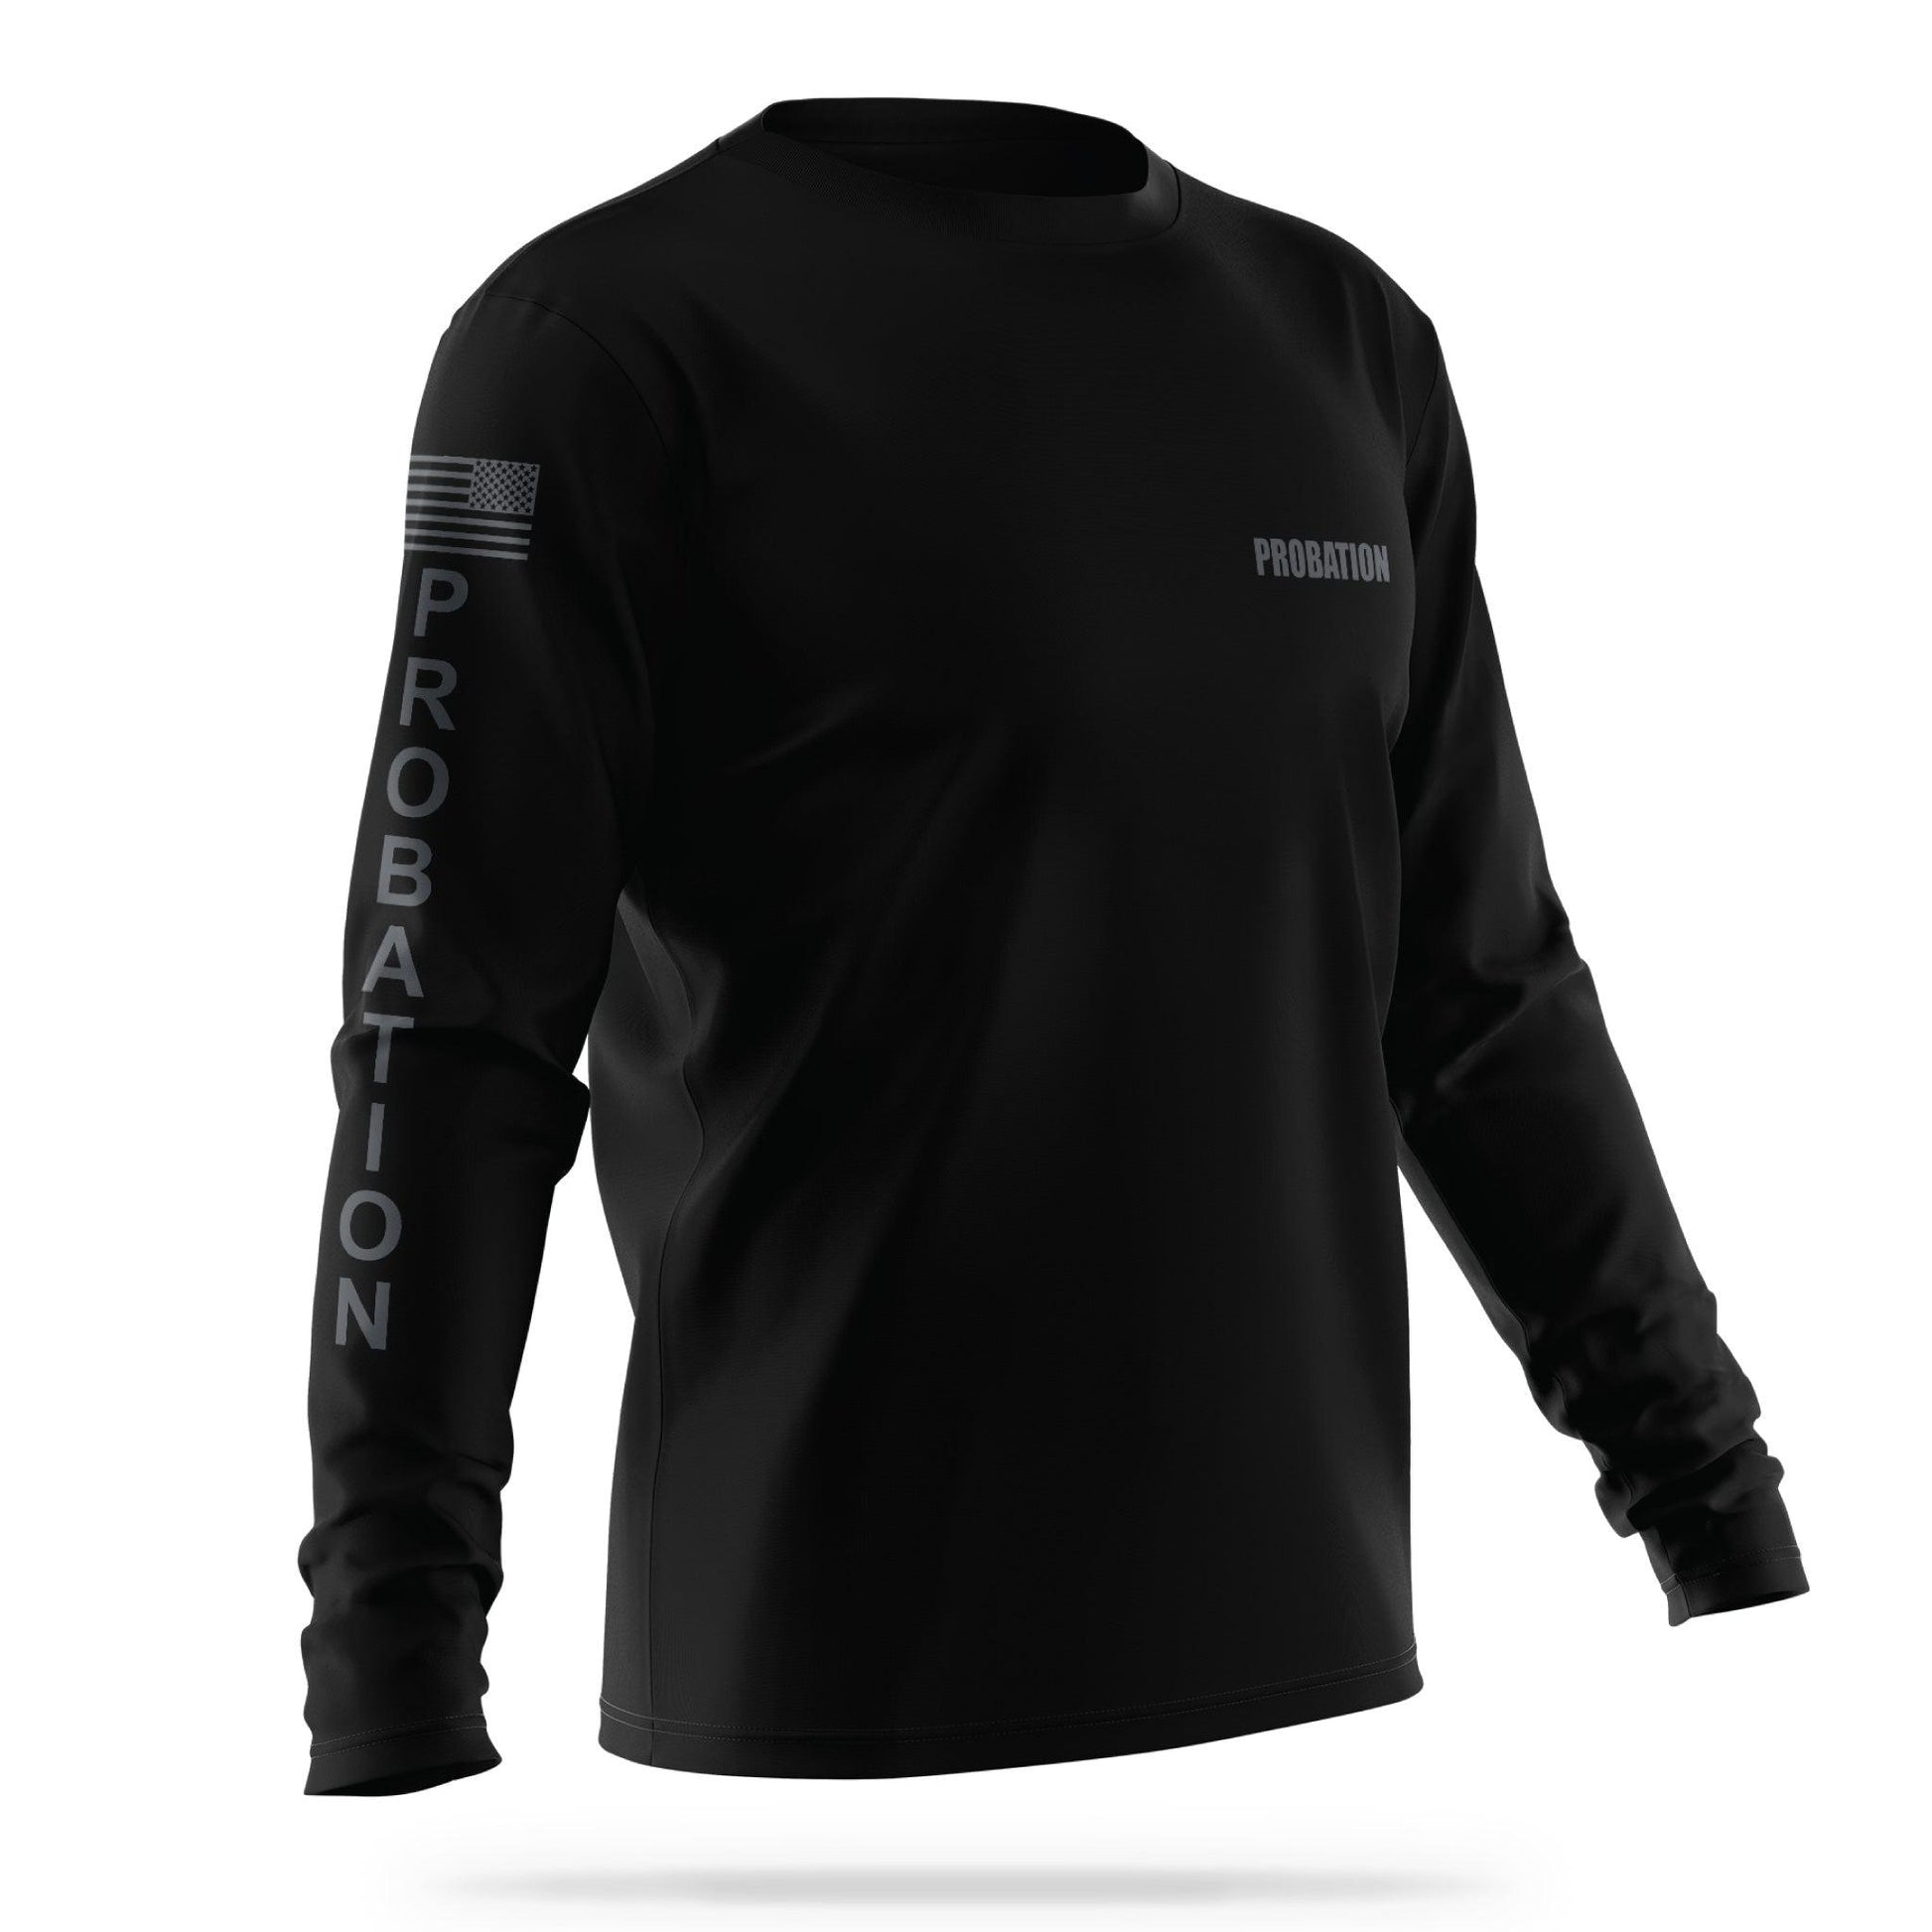 [PROBATION] Men's Utility Long Sleeve [BLK/GRY]-13 Fifty Apparel